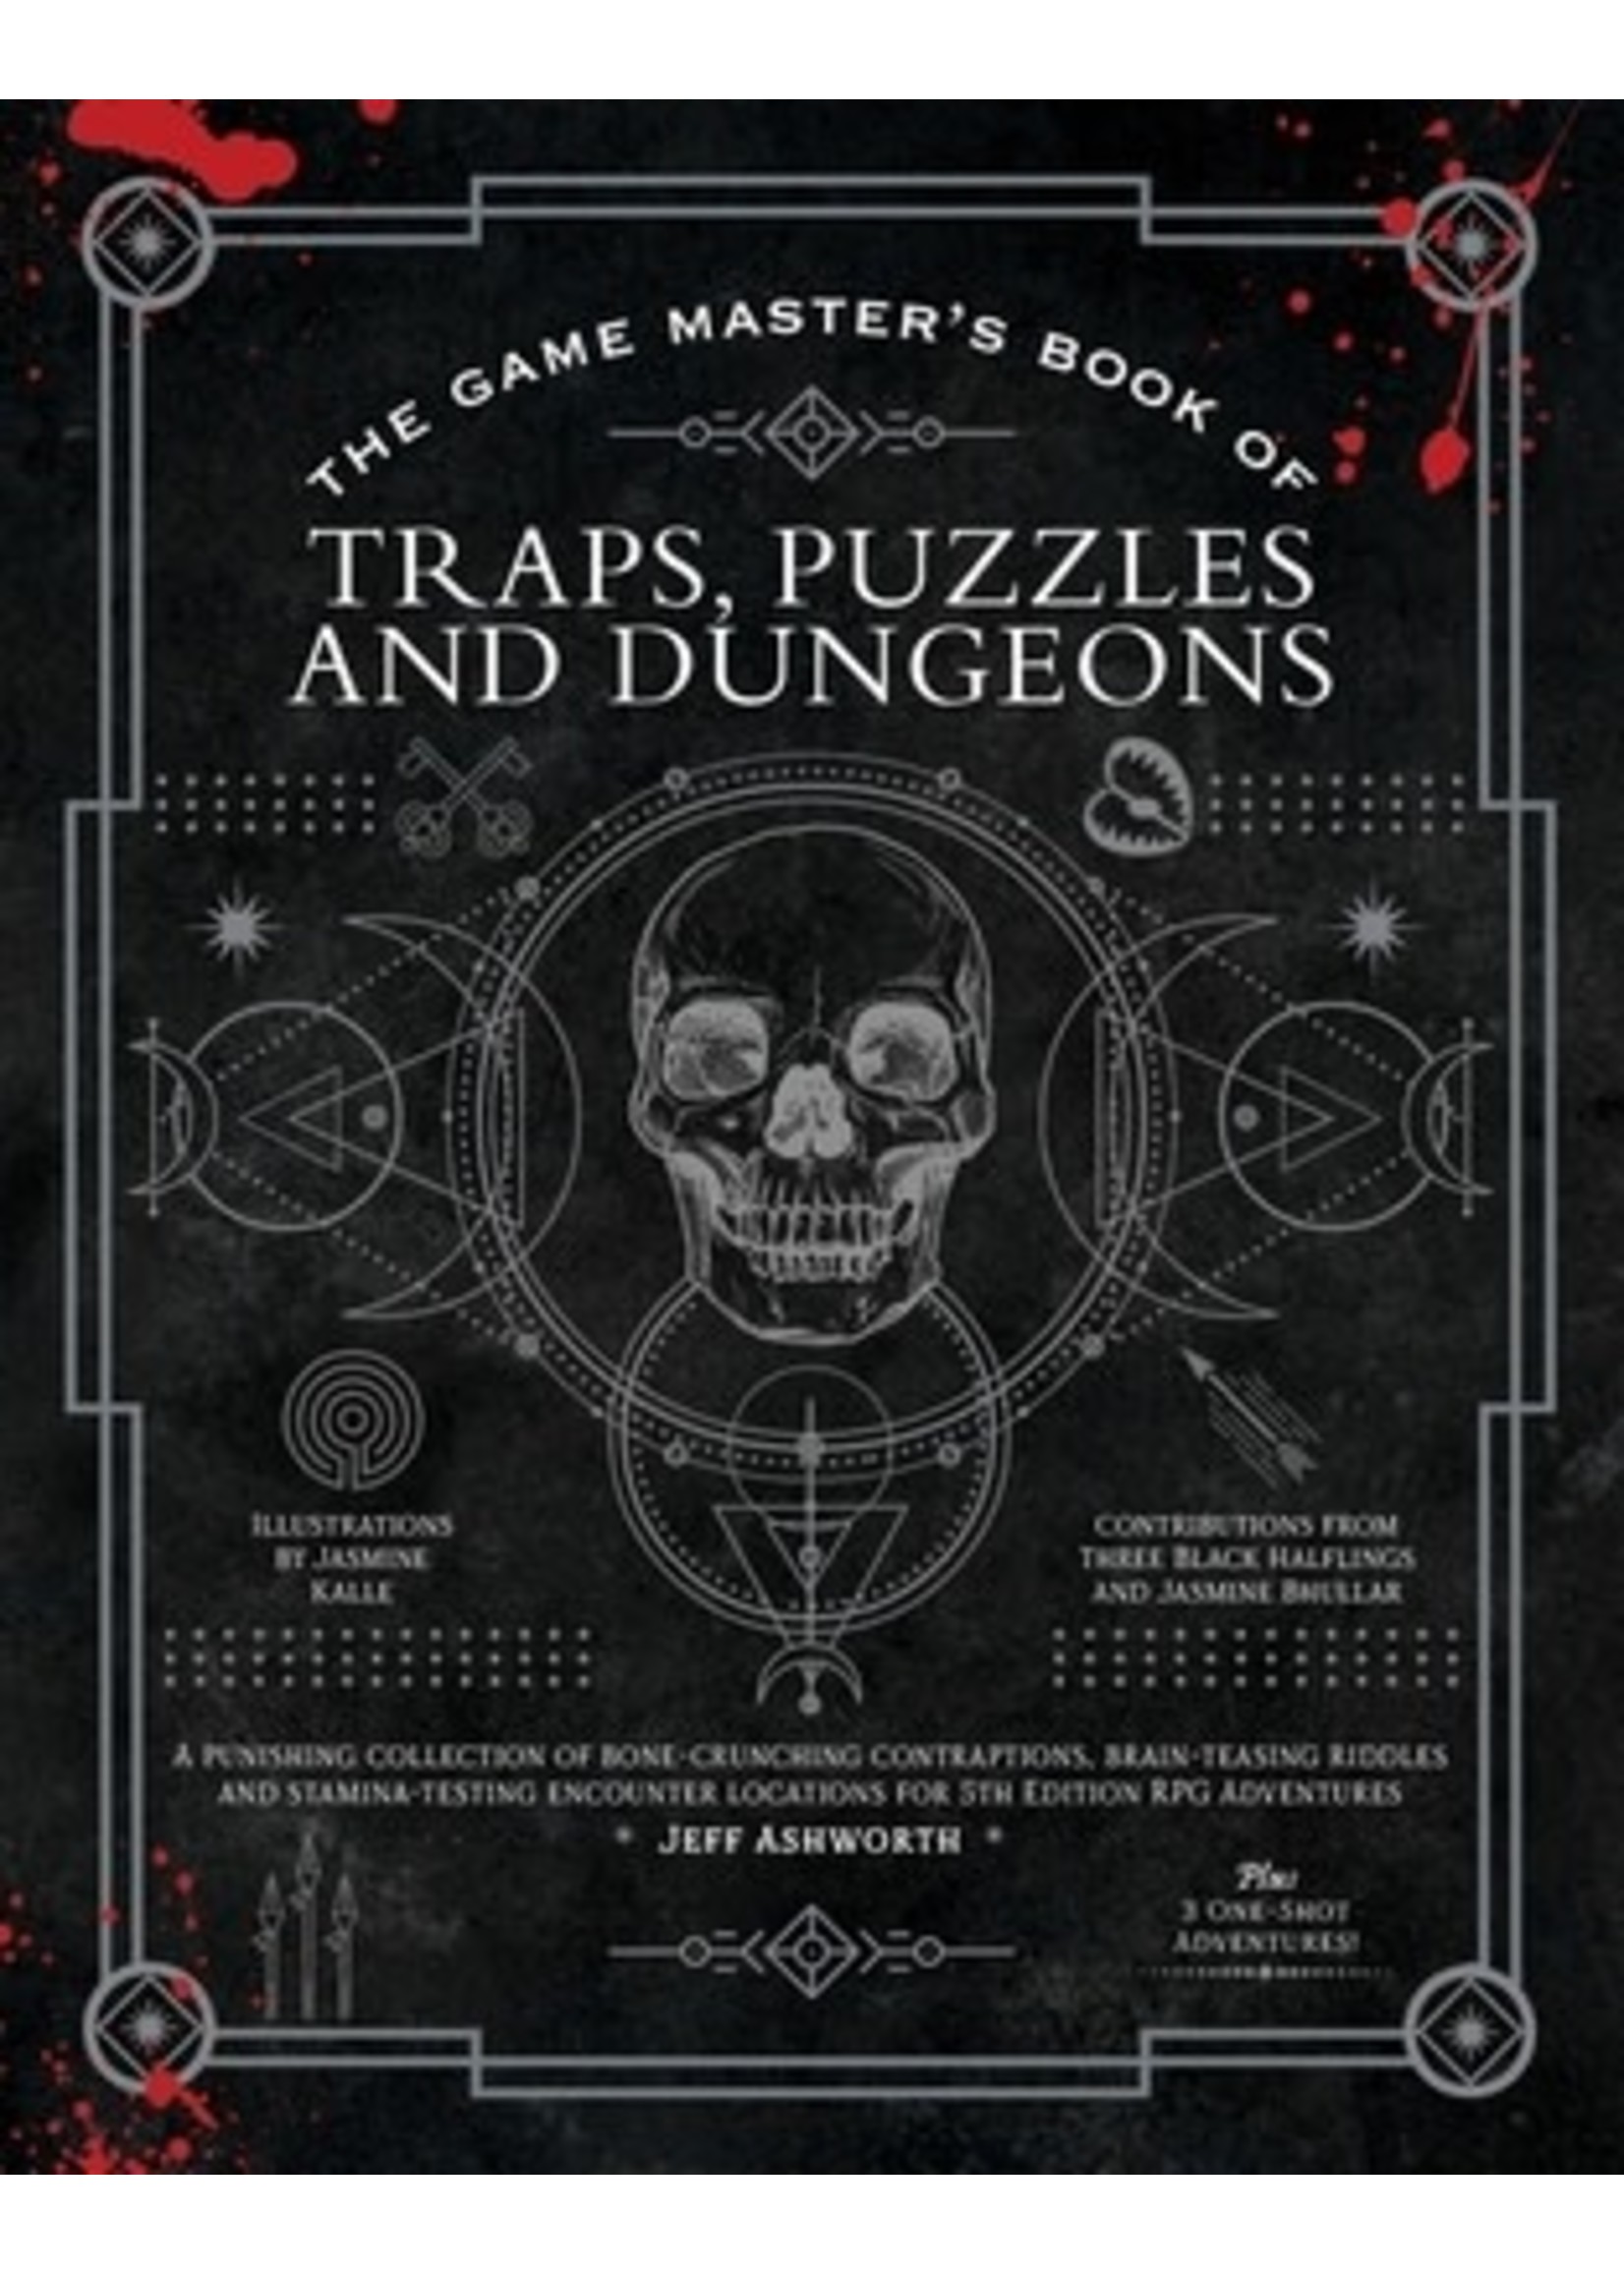 The Game Master's Book of Traps, Puzzles and Dungeons: 300+ Riddles, Challenges, Deadly Illusions, Bottomless Pits, Falling Blades, Death Traps, Escape Rooms and More for 5th Edition RPG Adventures by Jeff Ashworth